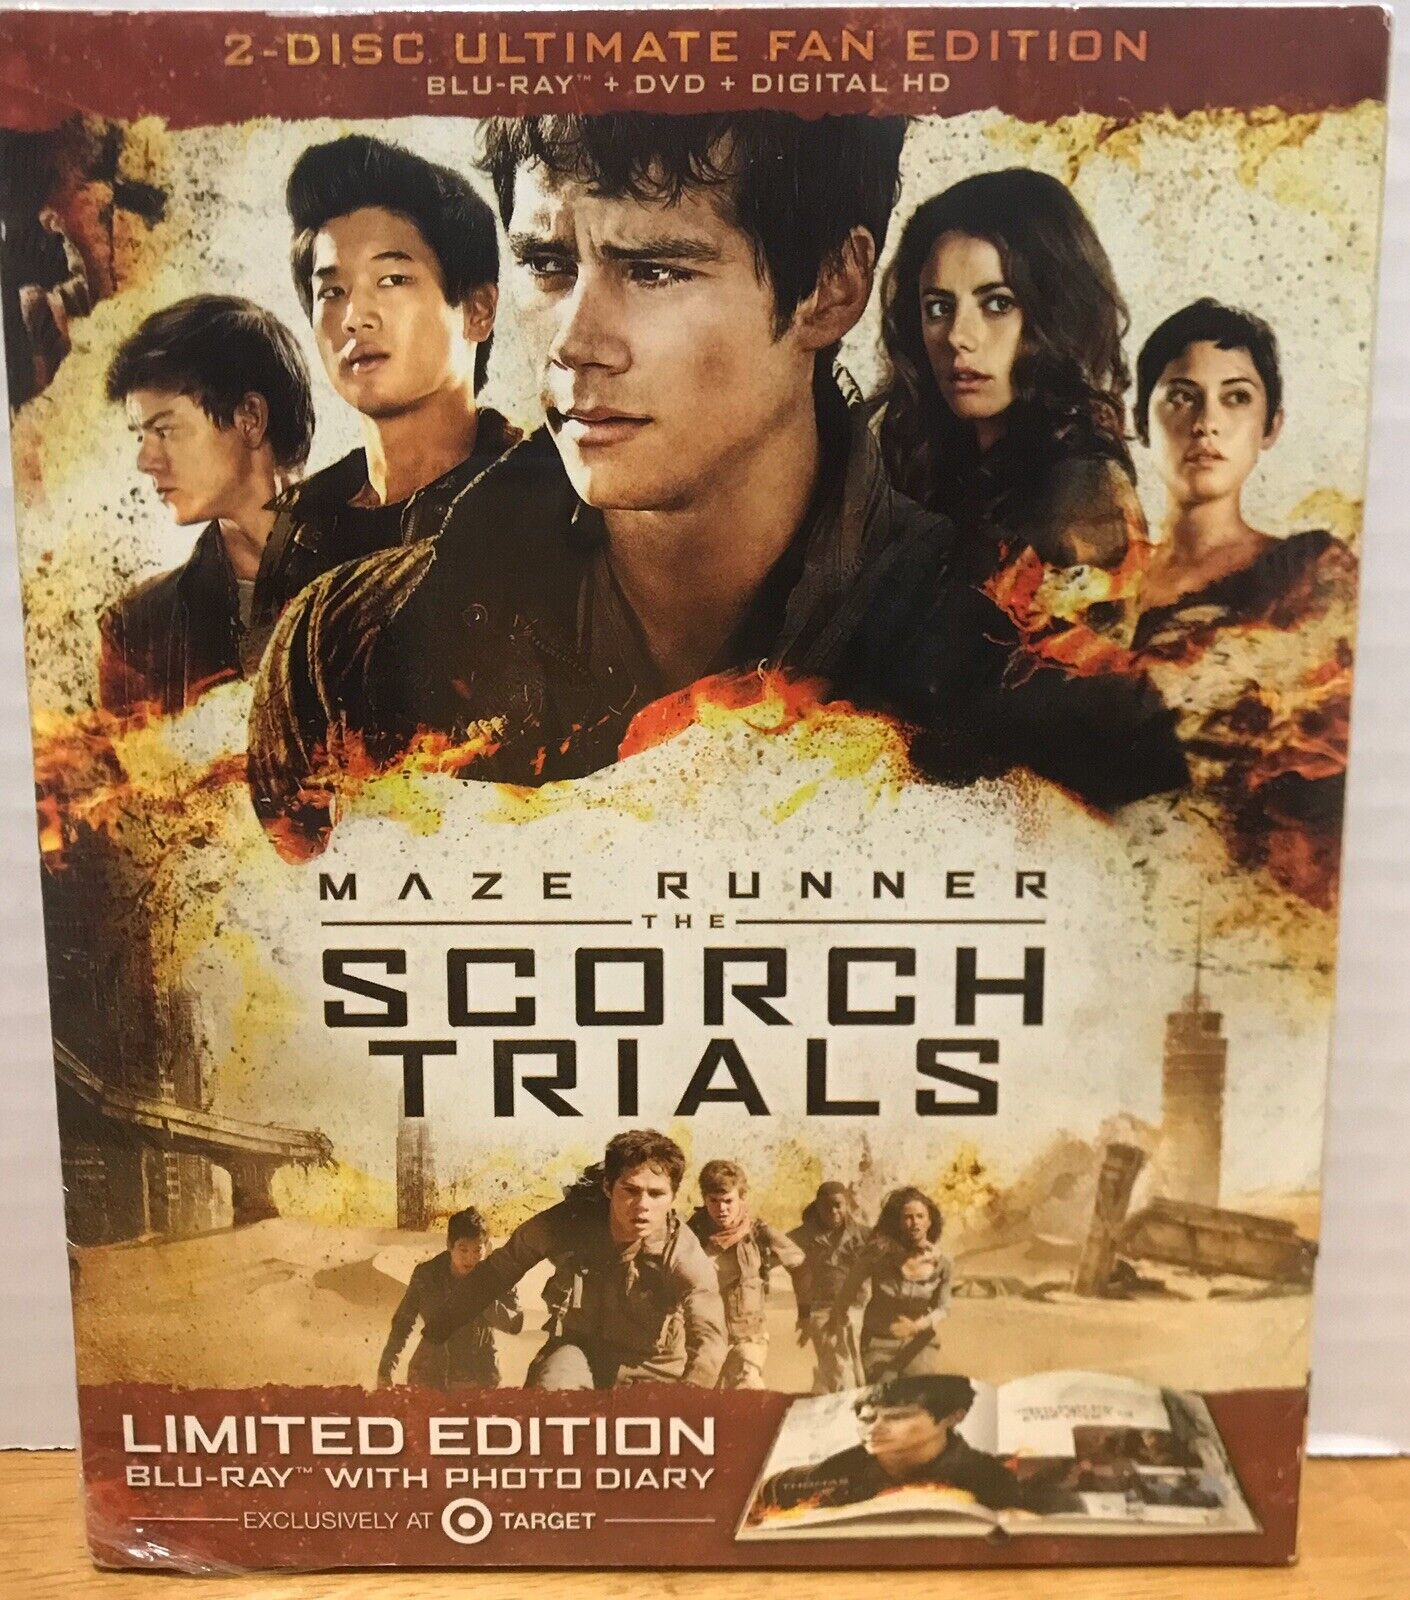 NEW SEALED Maze Runner Blu-Ray Limited Target Edition The Scorch Trials